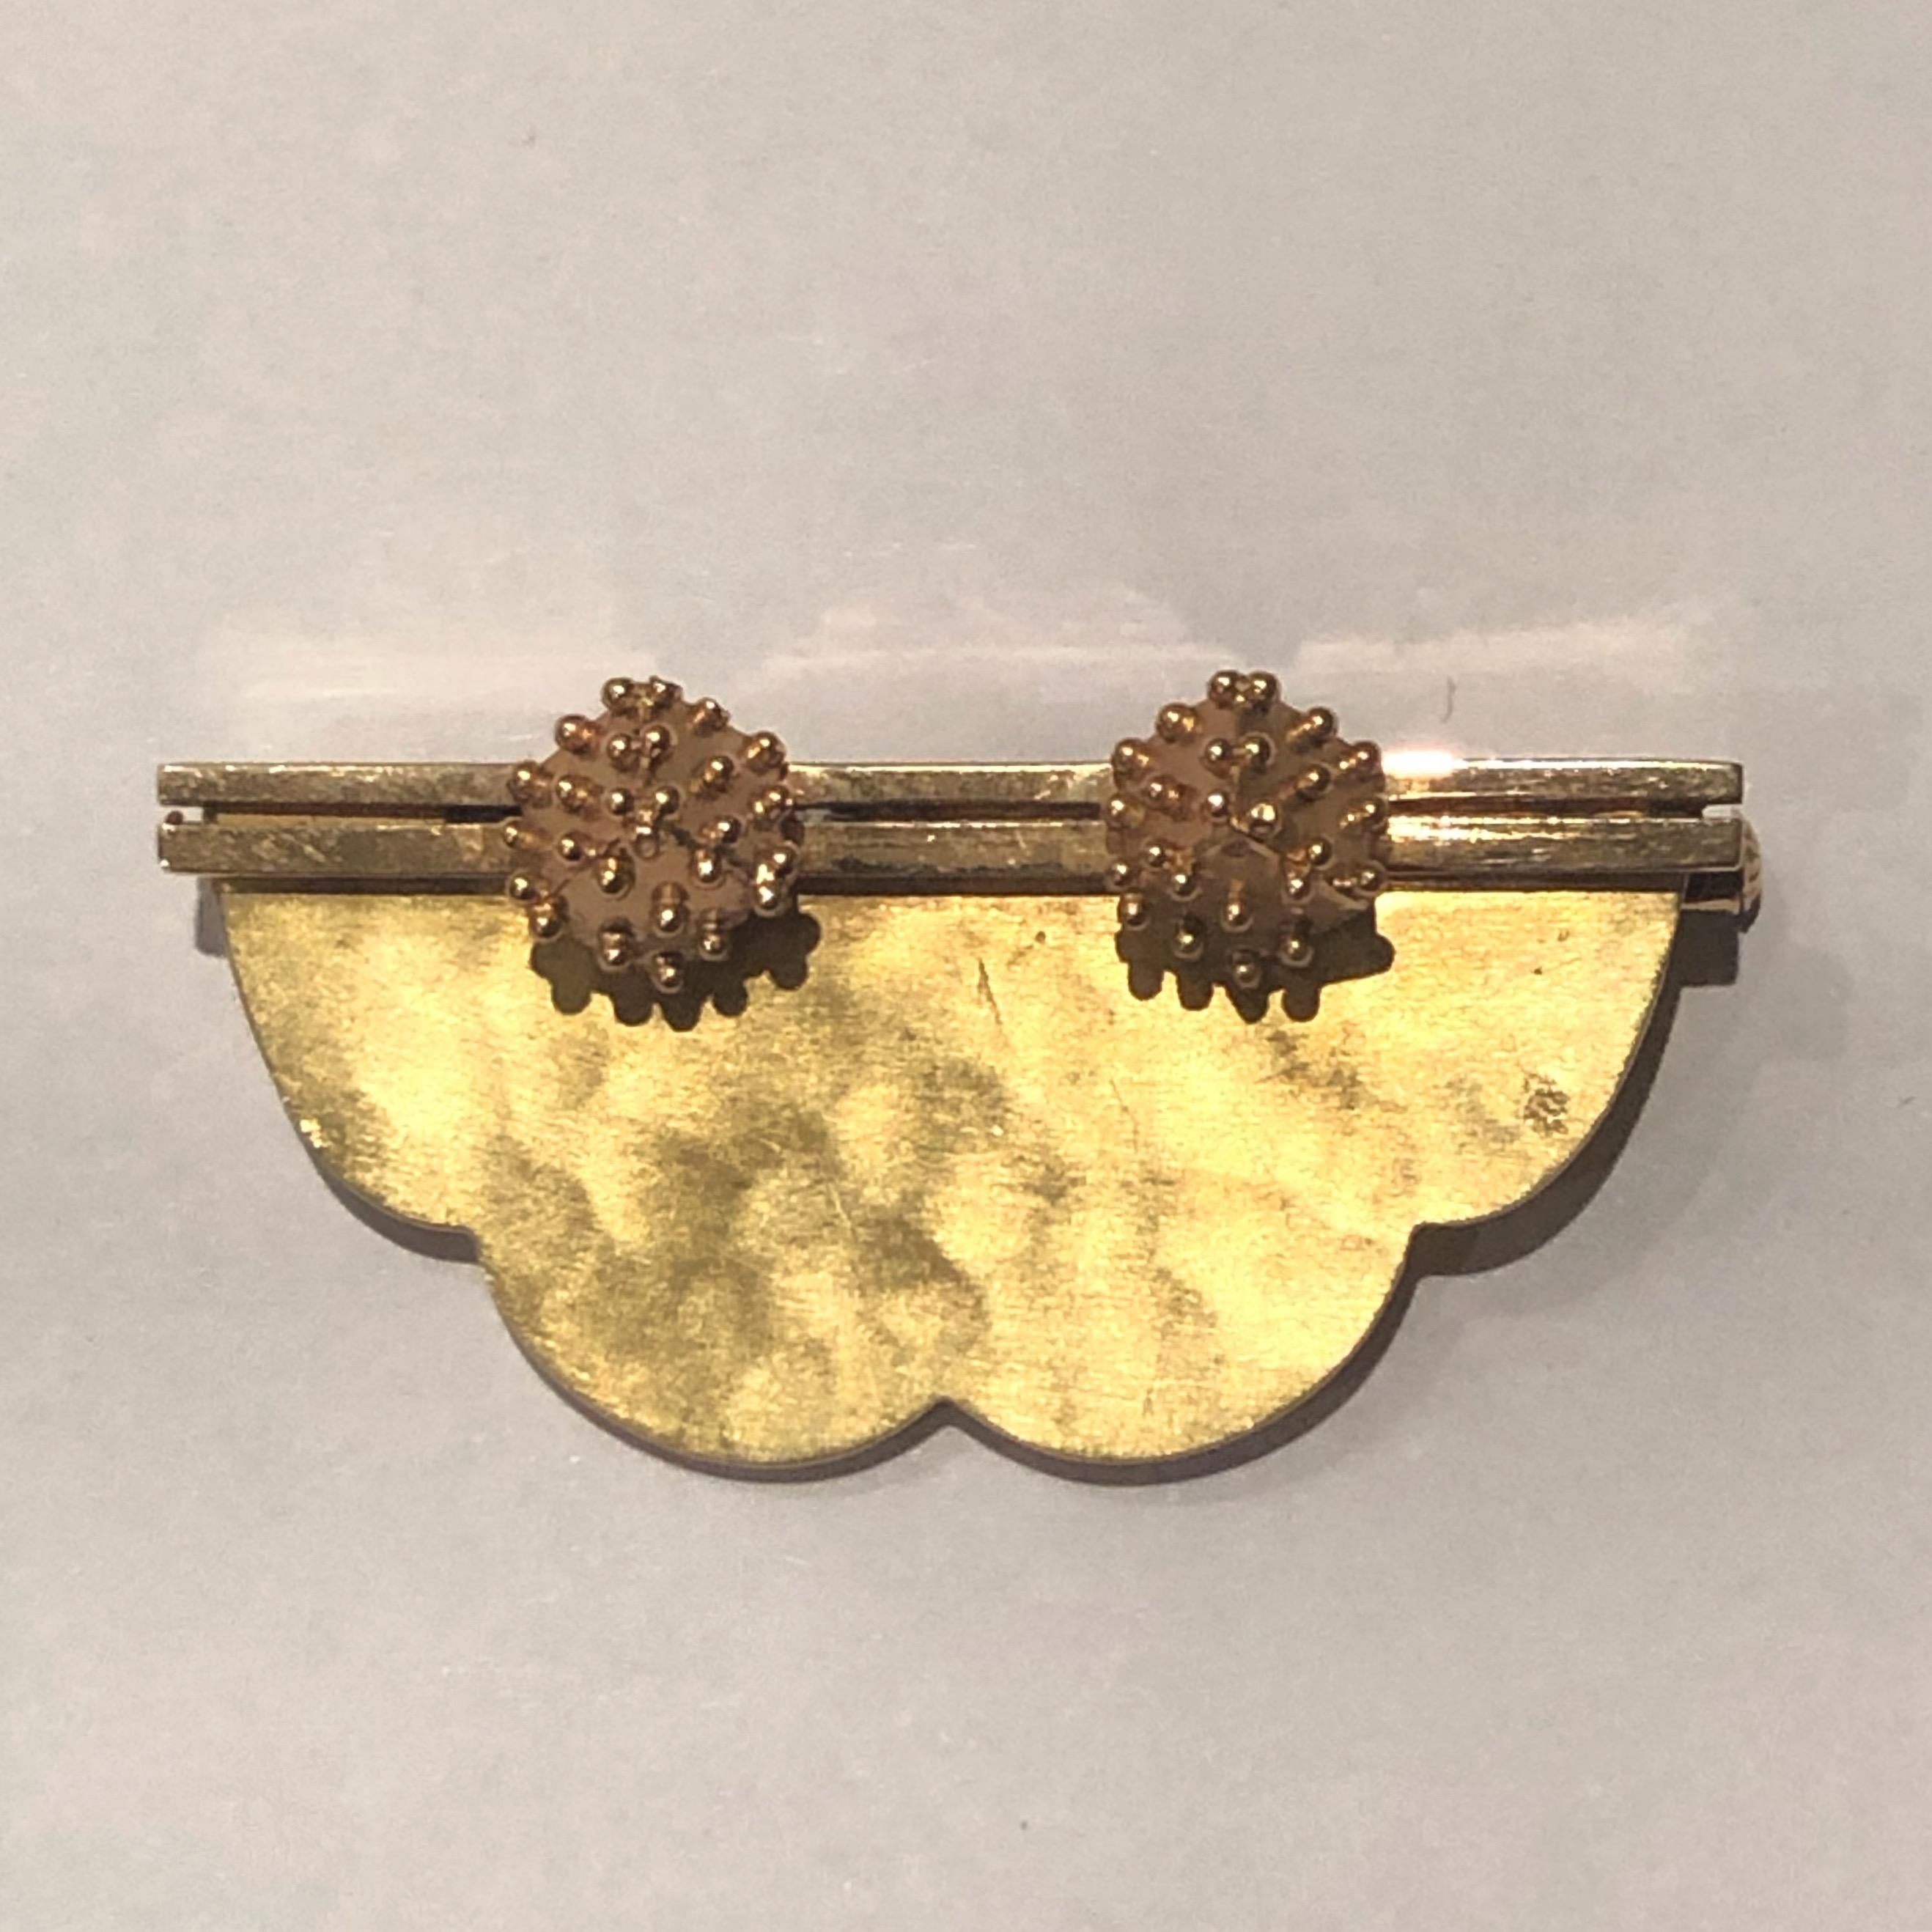 Unique Art-Deco Jean Desprès brooch made in yellow gold. 

Brooch is made with different technics : 
- satinated hammered yellow gold 18K
- polished yellow gold 18K 
- beaded cubes

Brooch is signed 